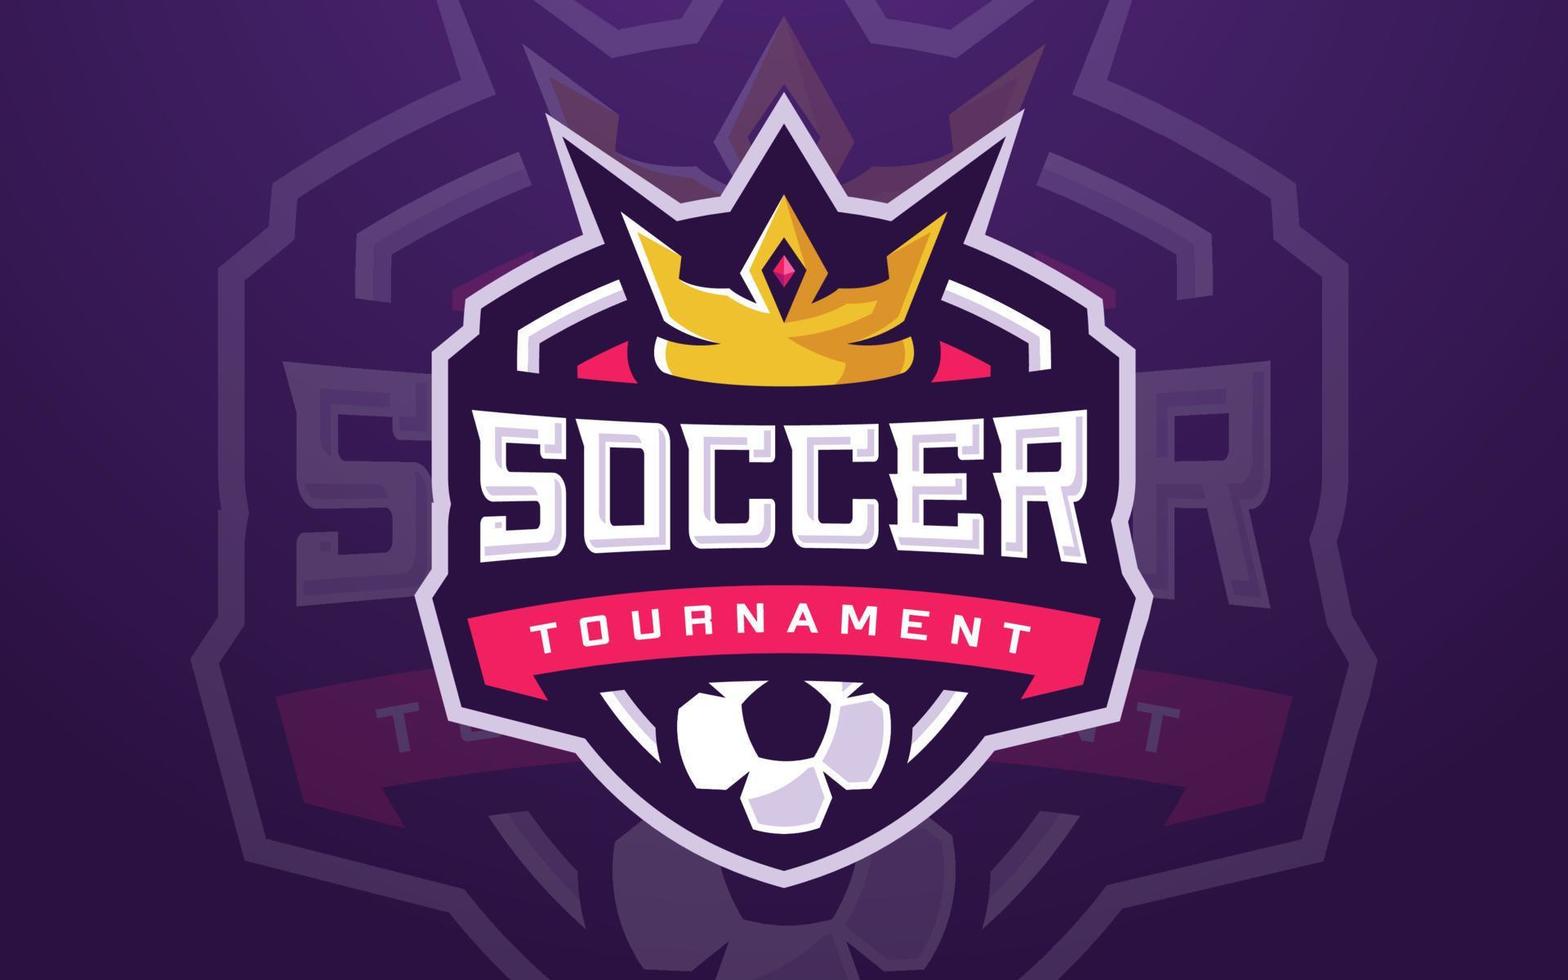 Professional Soccer Club Logo Template with Crown for Sports Team and Tournament vector